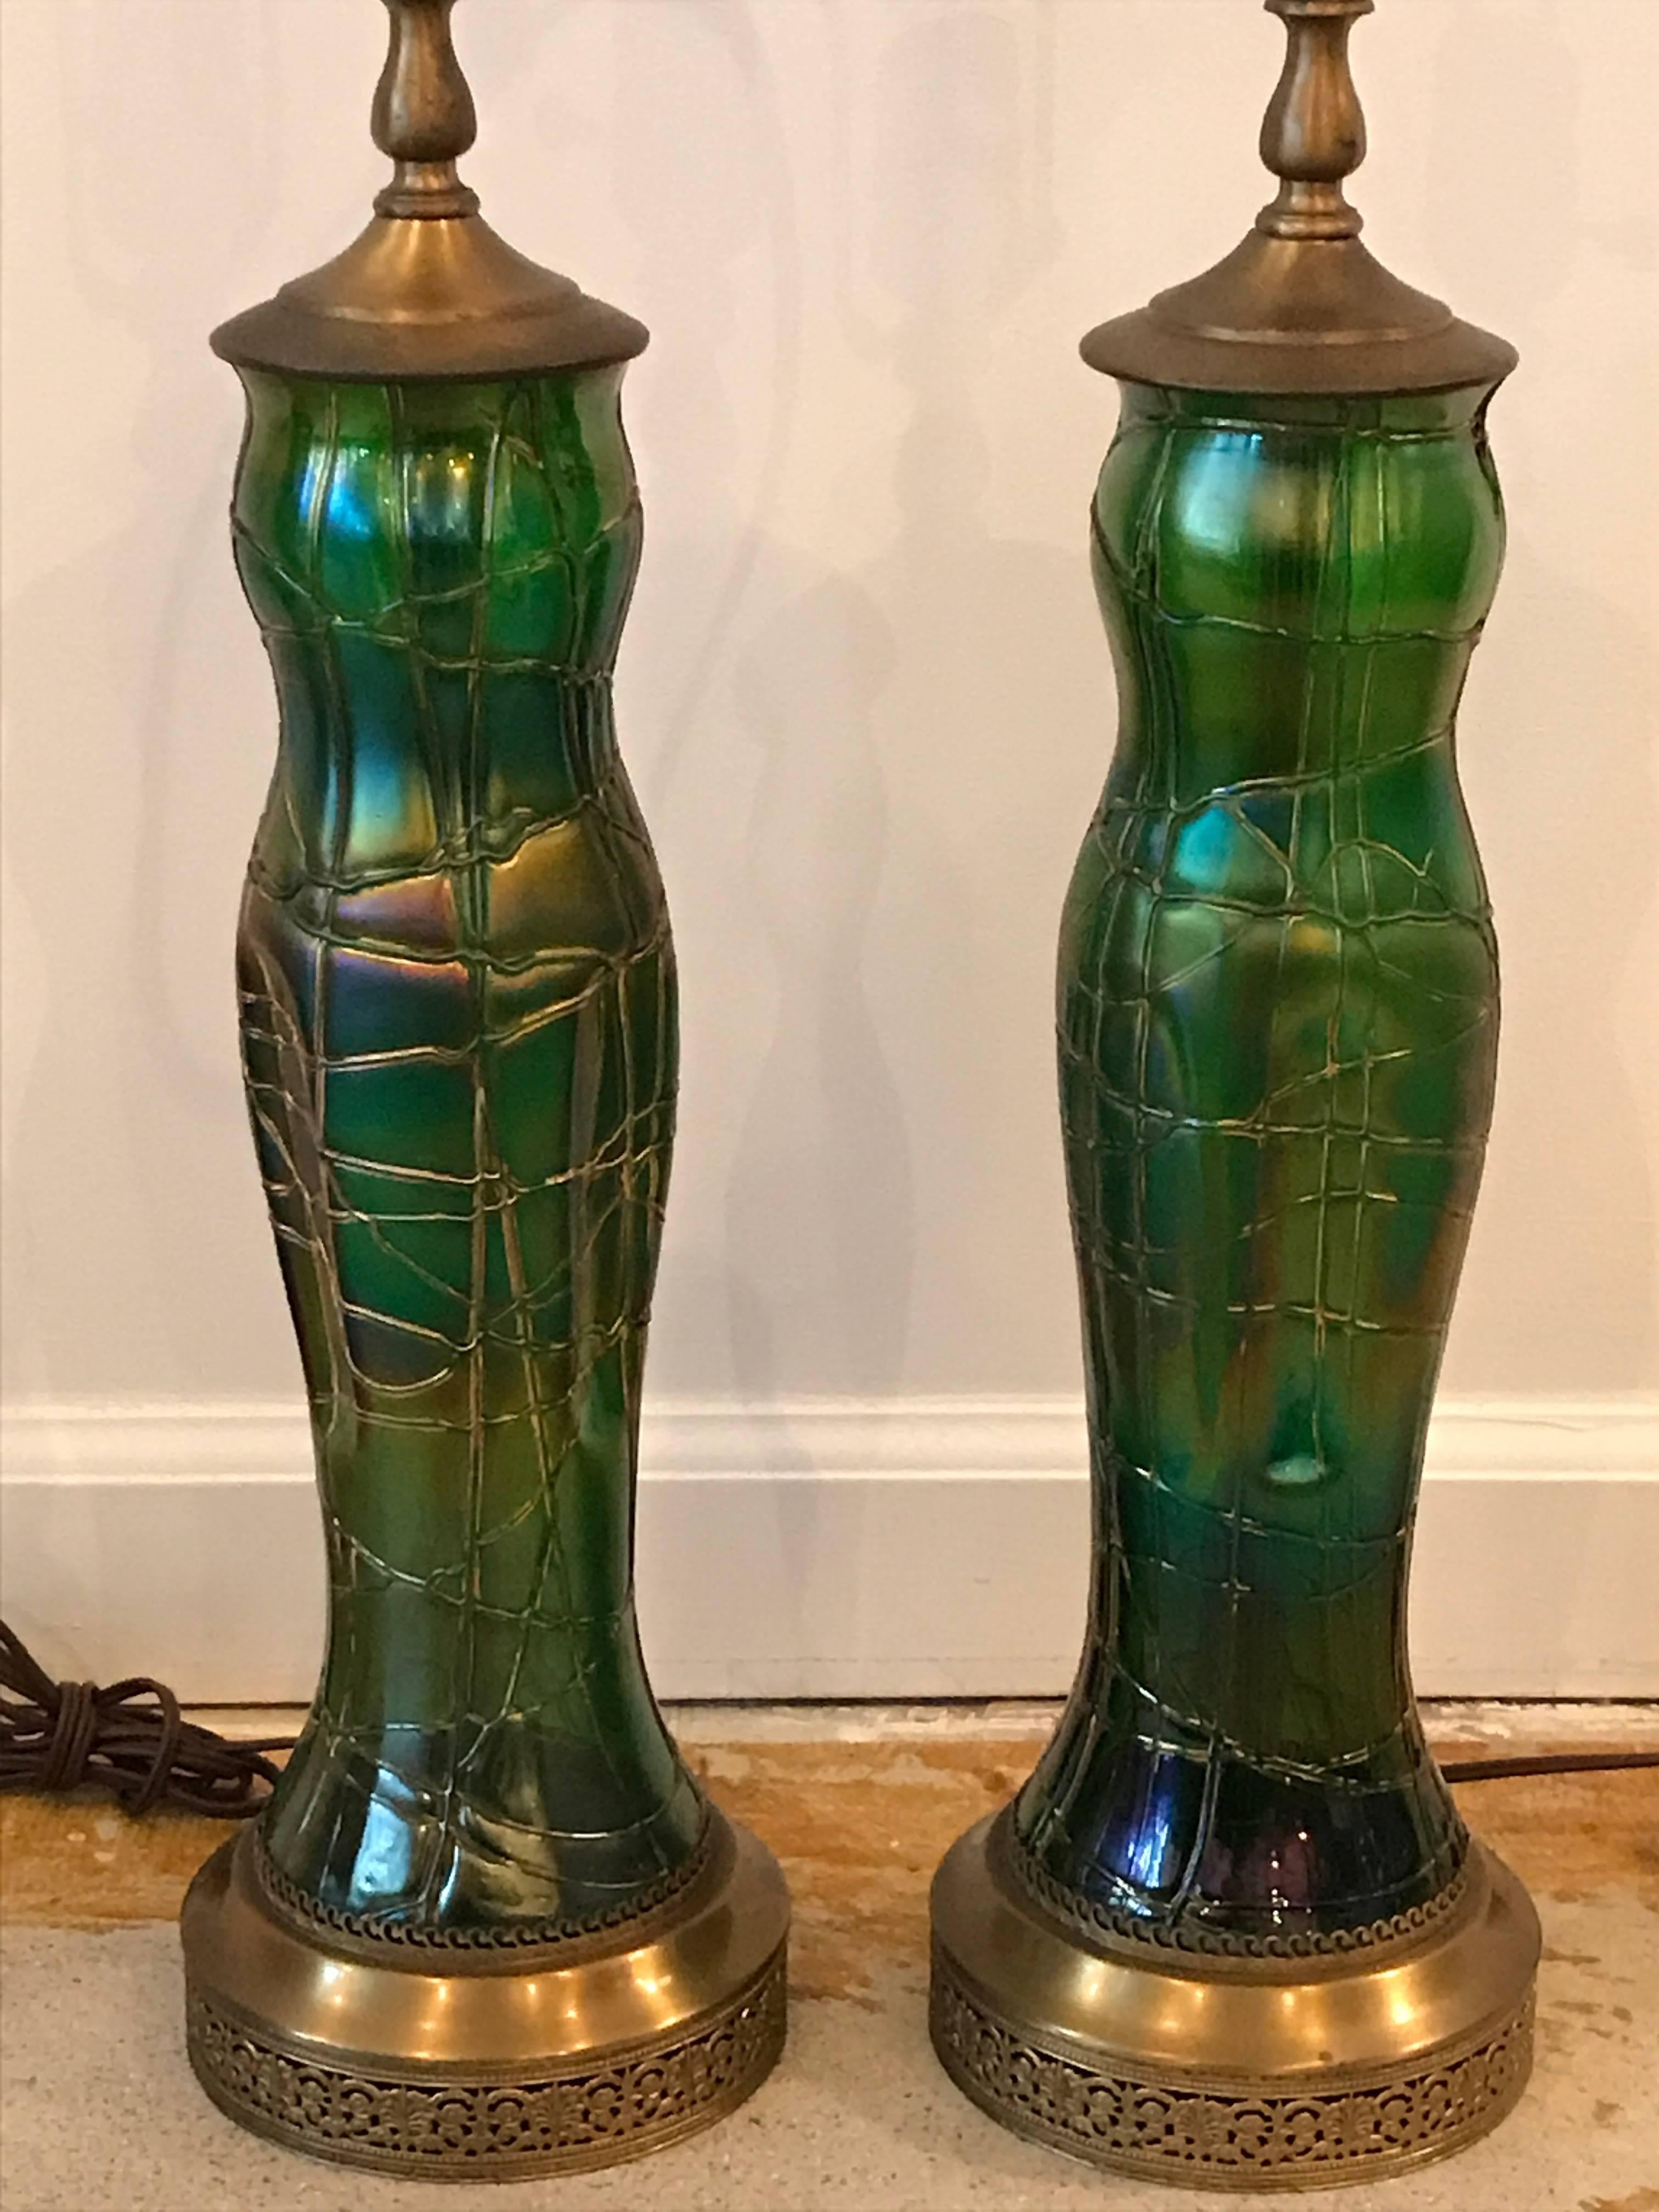 Beautiful pair of Art Nouveau veined iridescent green art glass table lamps by Wilhelm Kralik. Produced in Bohemia which is now the Czech Republic. Shades not included, rewiring recommended.

The Kralik glassworks, full name Wilhelm Kralik Sohne,